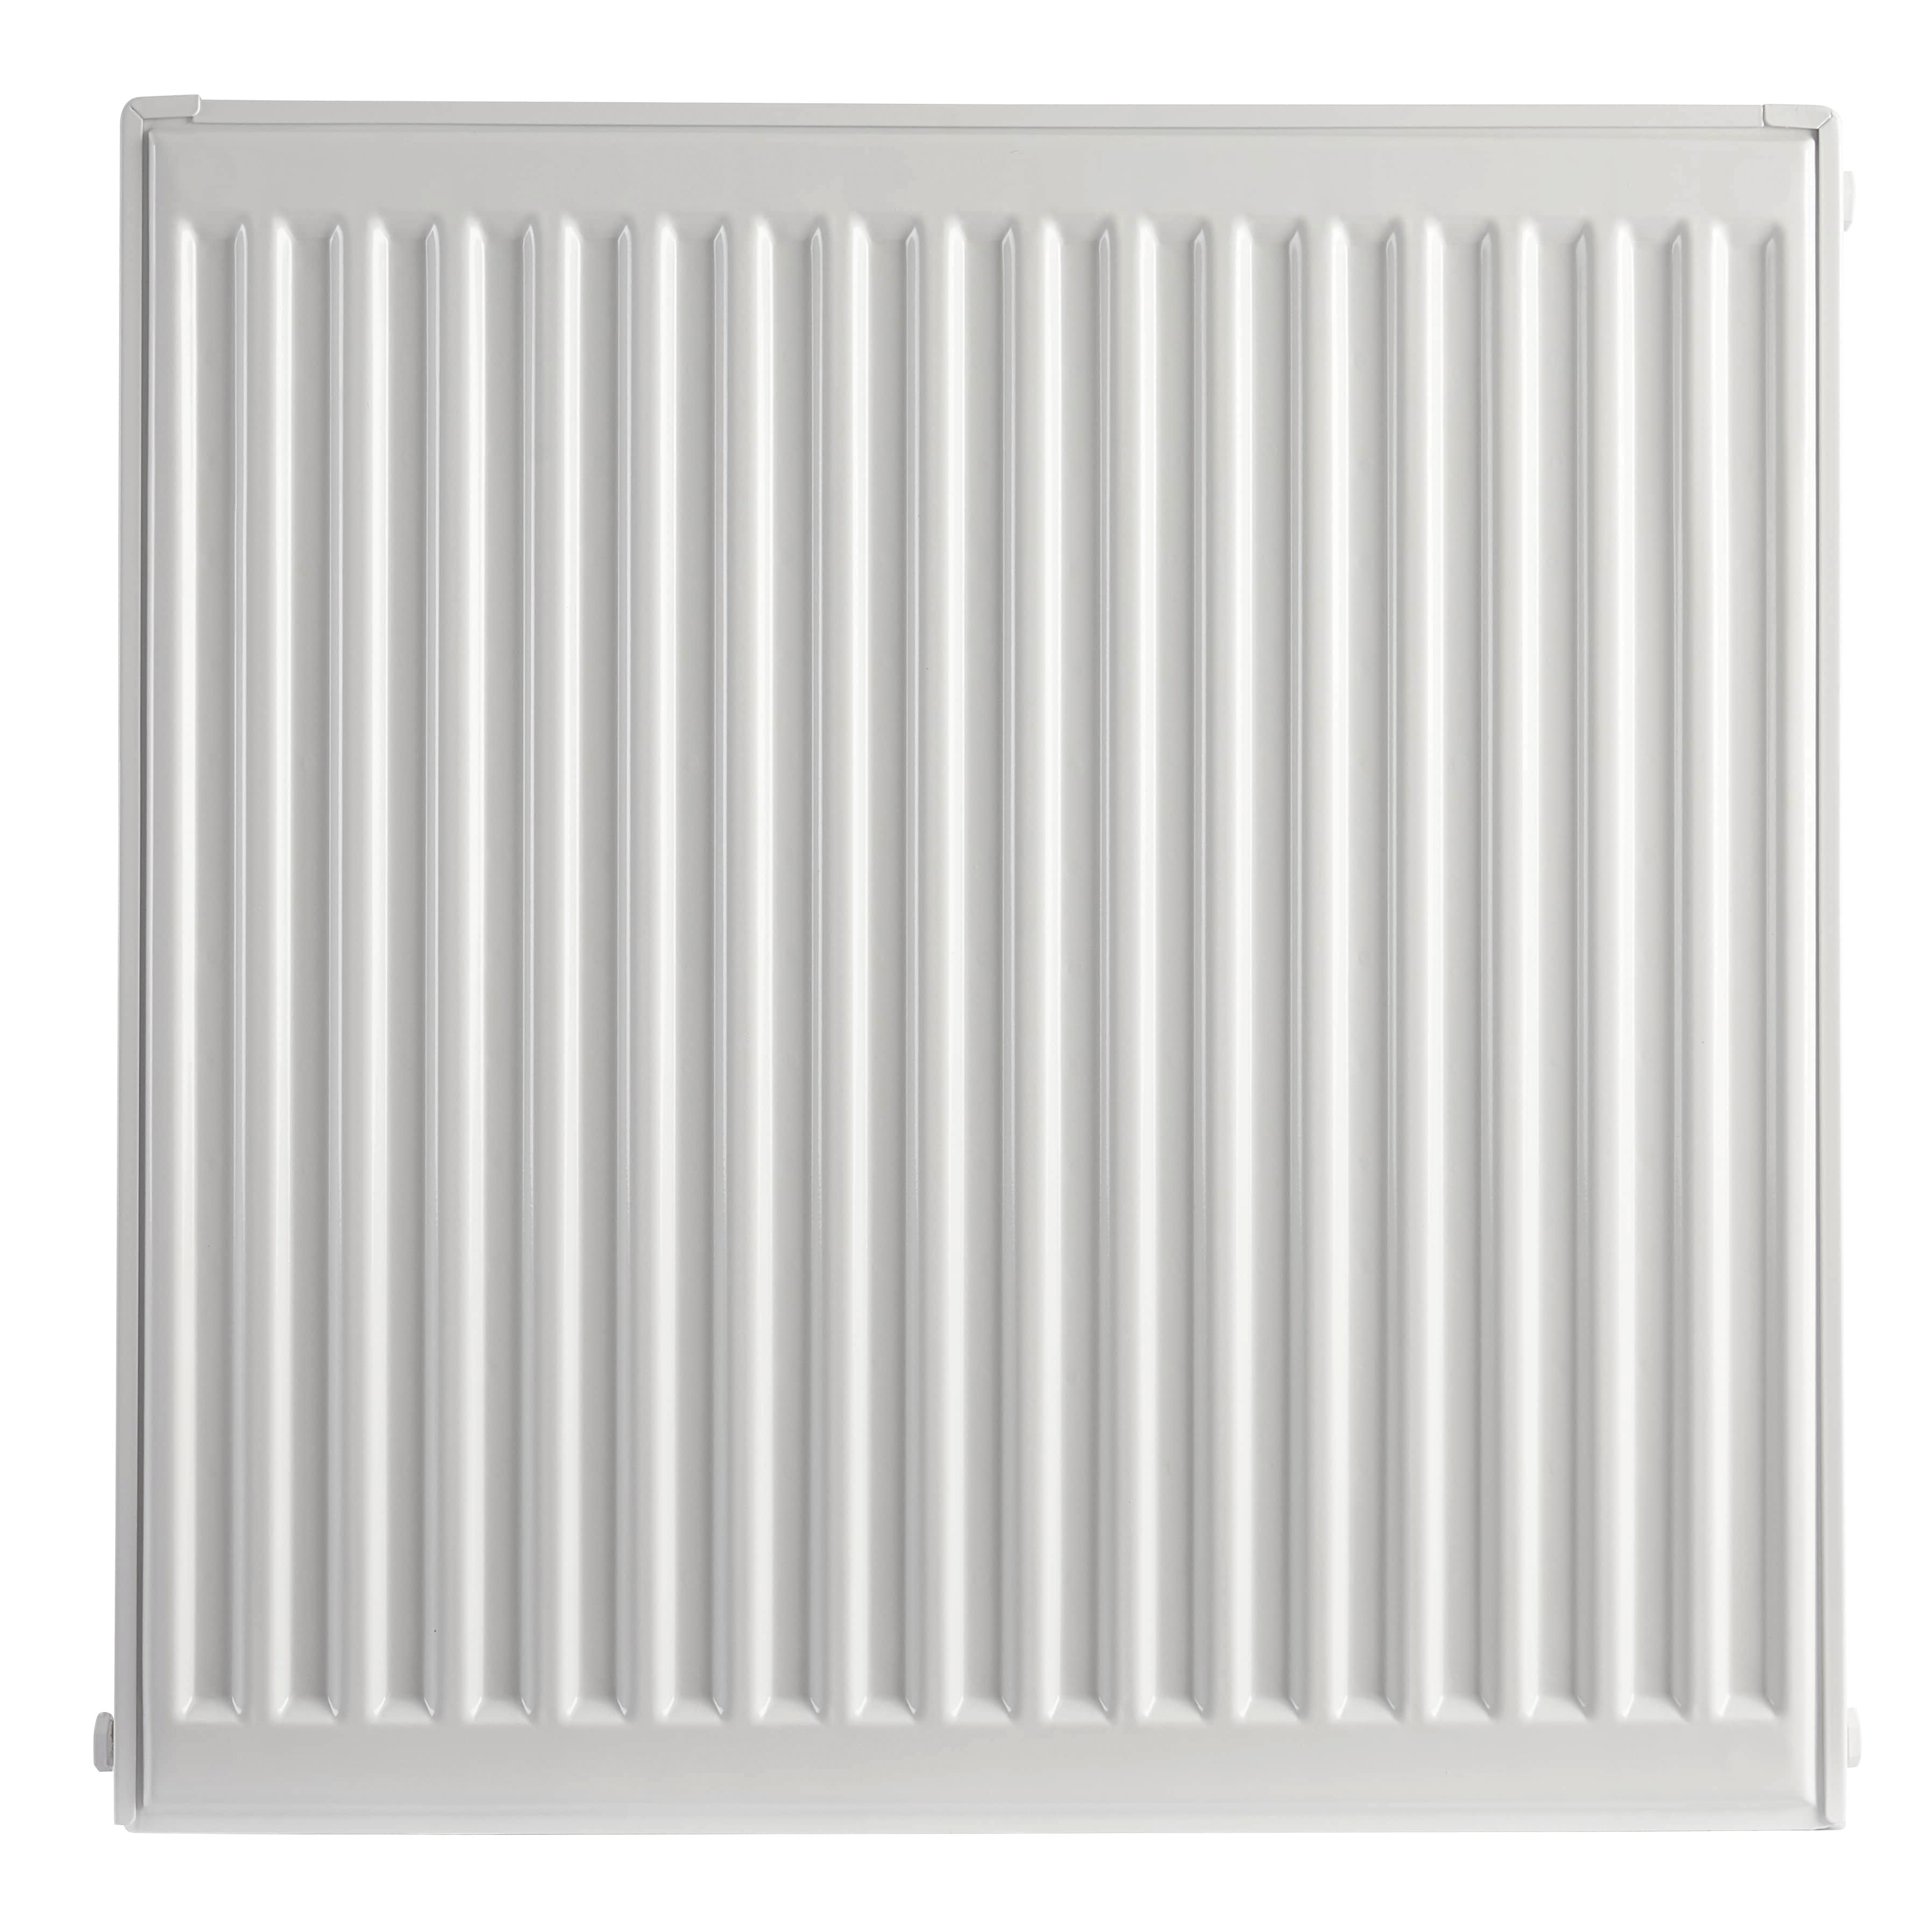 Homeline by Stelrad 600 x 400mm Type 21 Double Panel Plus Single Convector Radiator